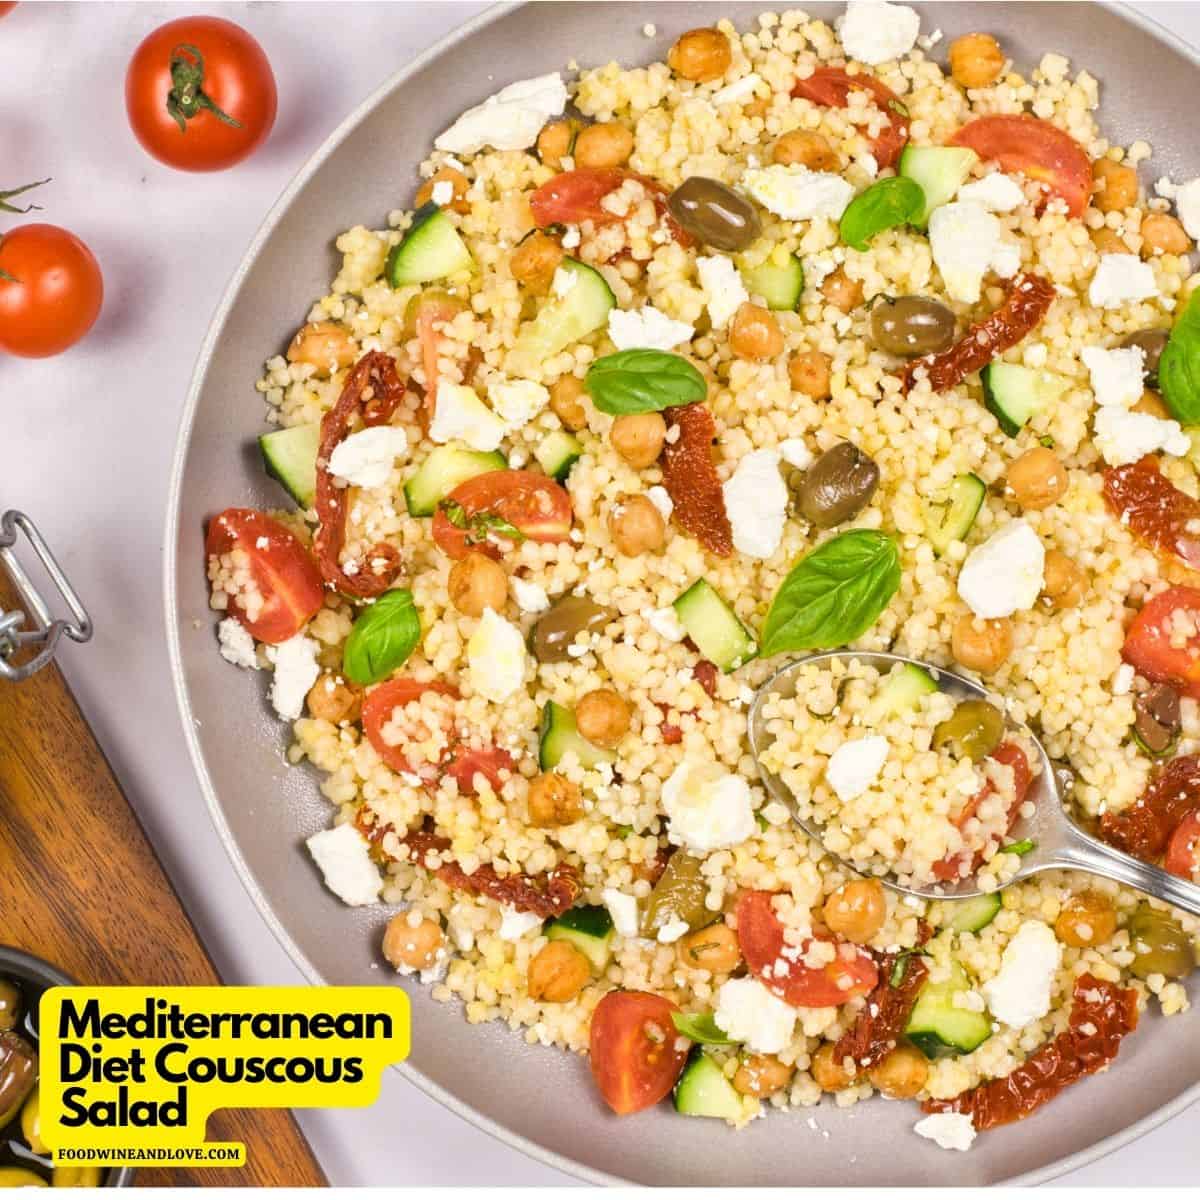 Mediterranean Diet Couscous Salad, a simple and delicious recipe filled with healthy ingredients.  Vegan, Mediterranean Diet friendly.